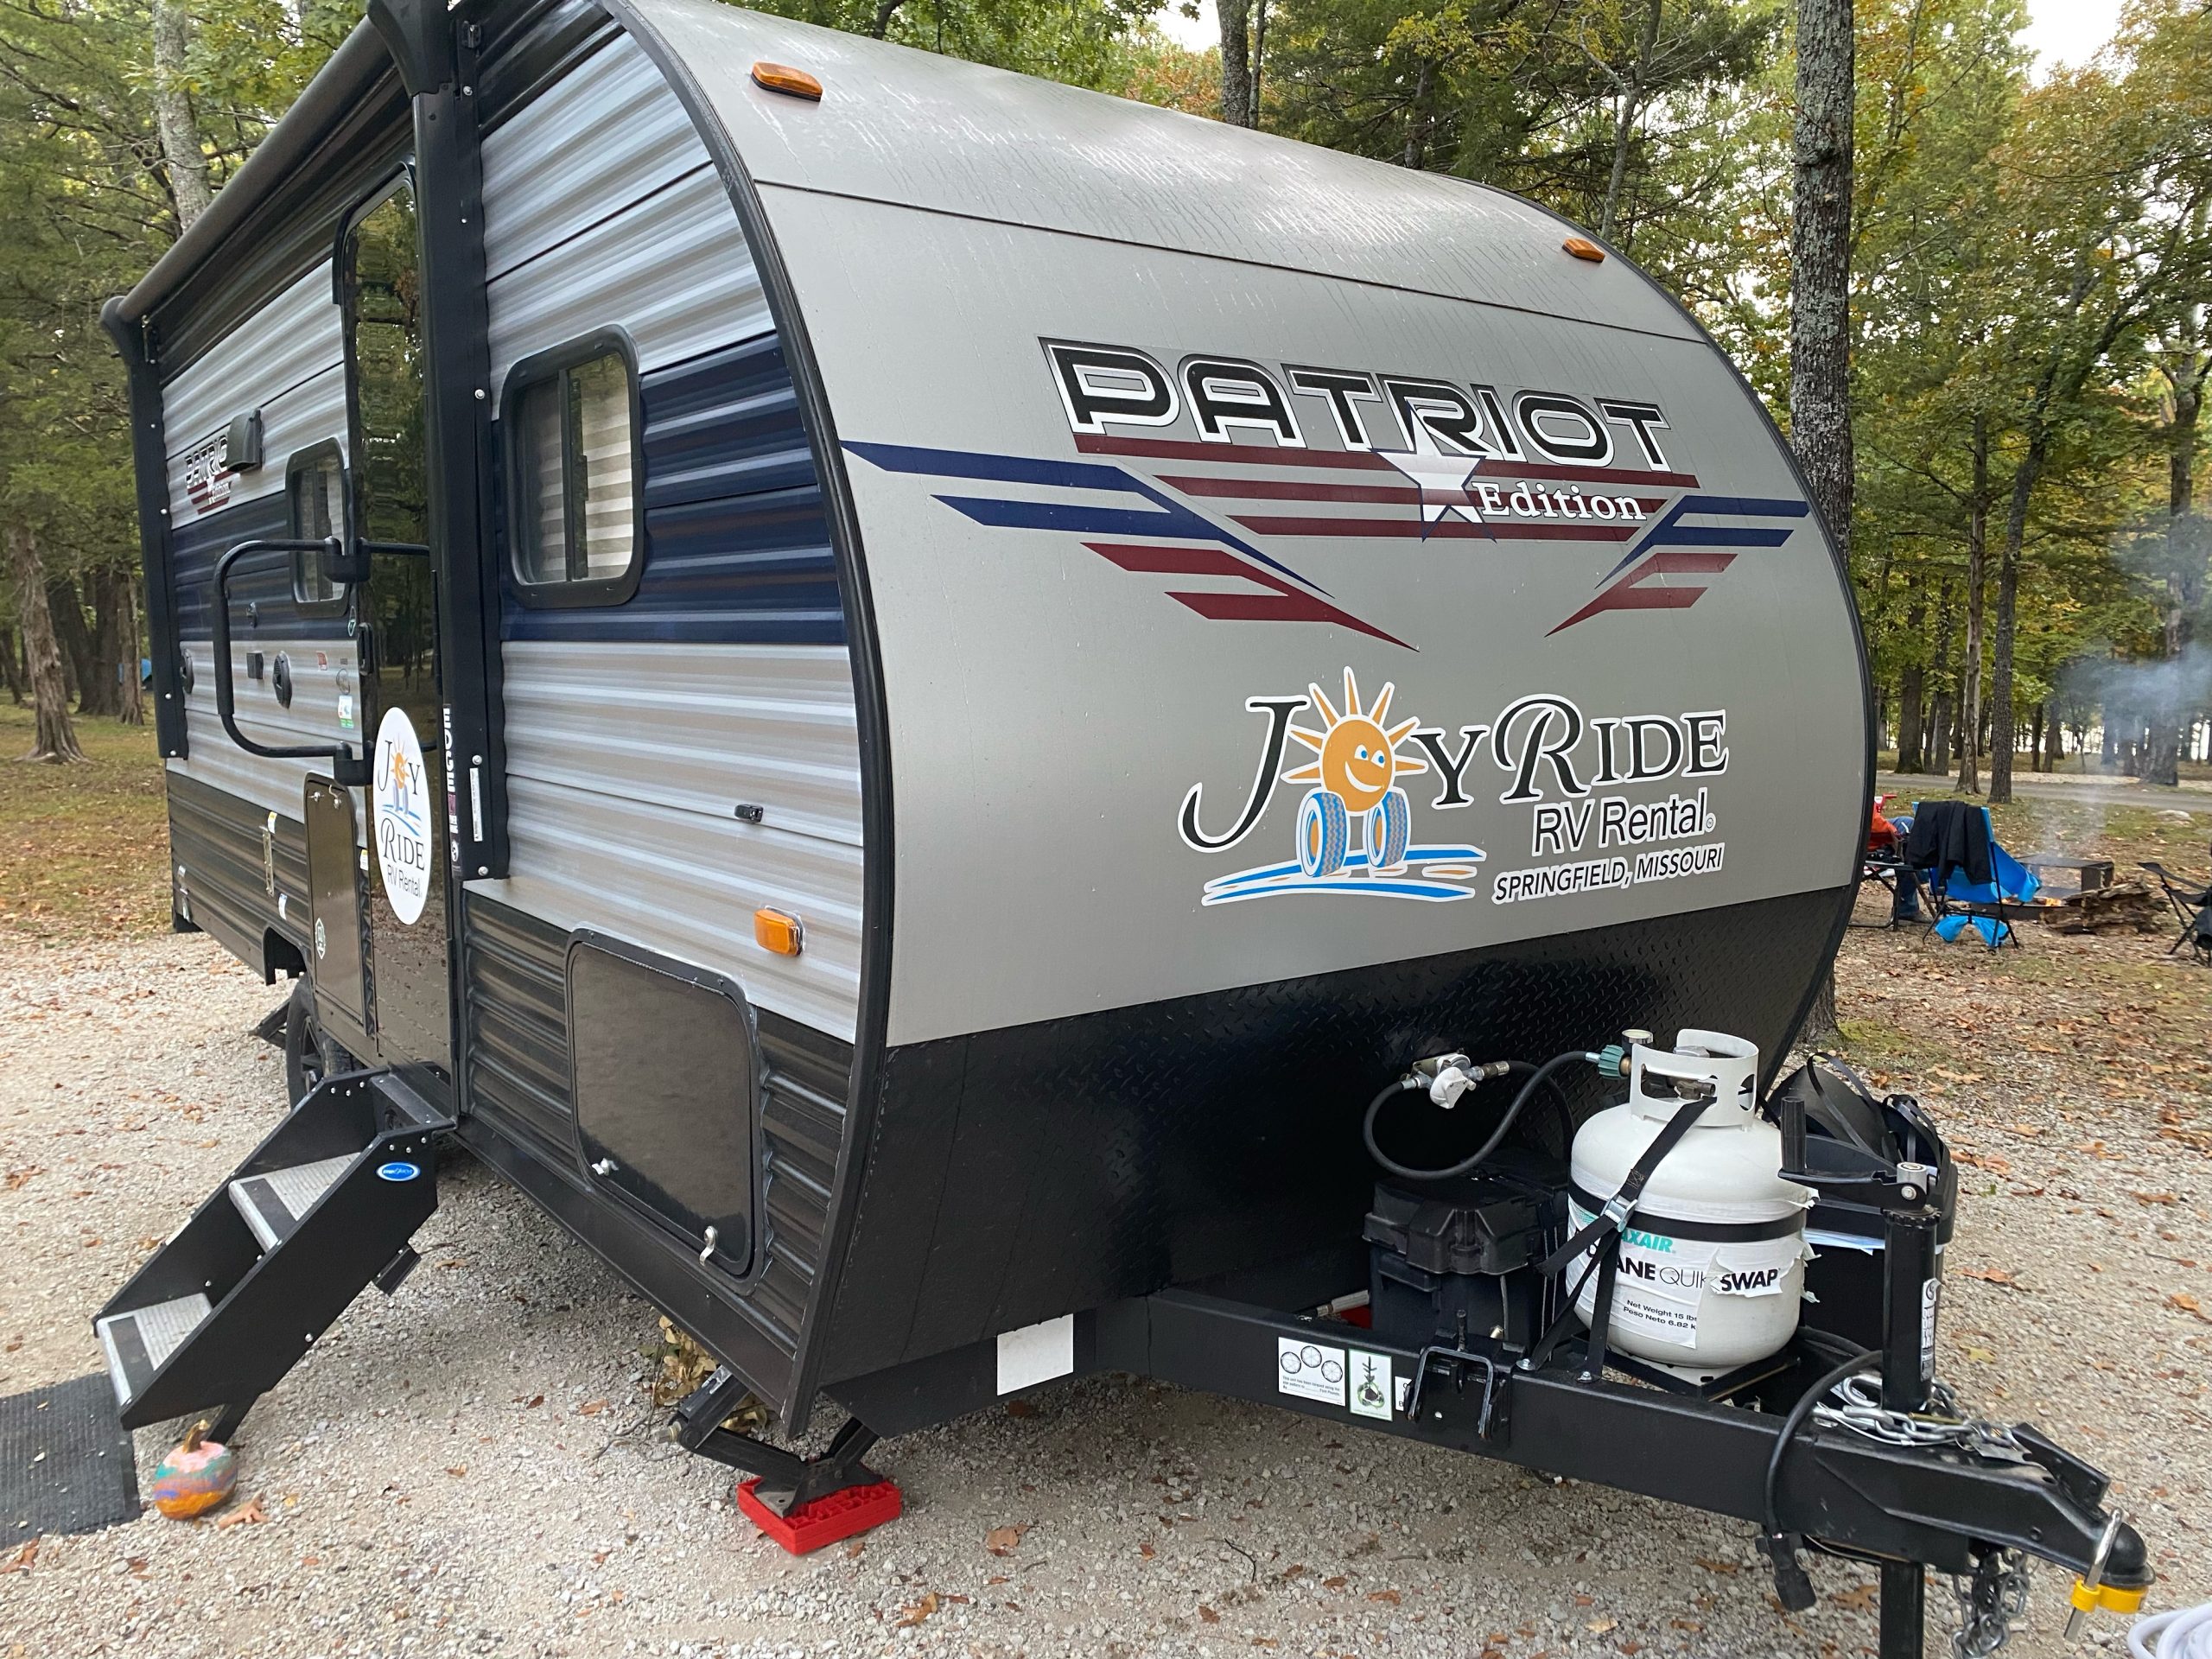 A black, gray and blue trailer with the logo for Joyride RV Rental on its side